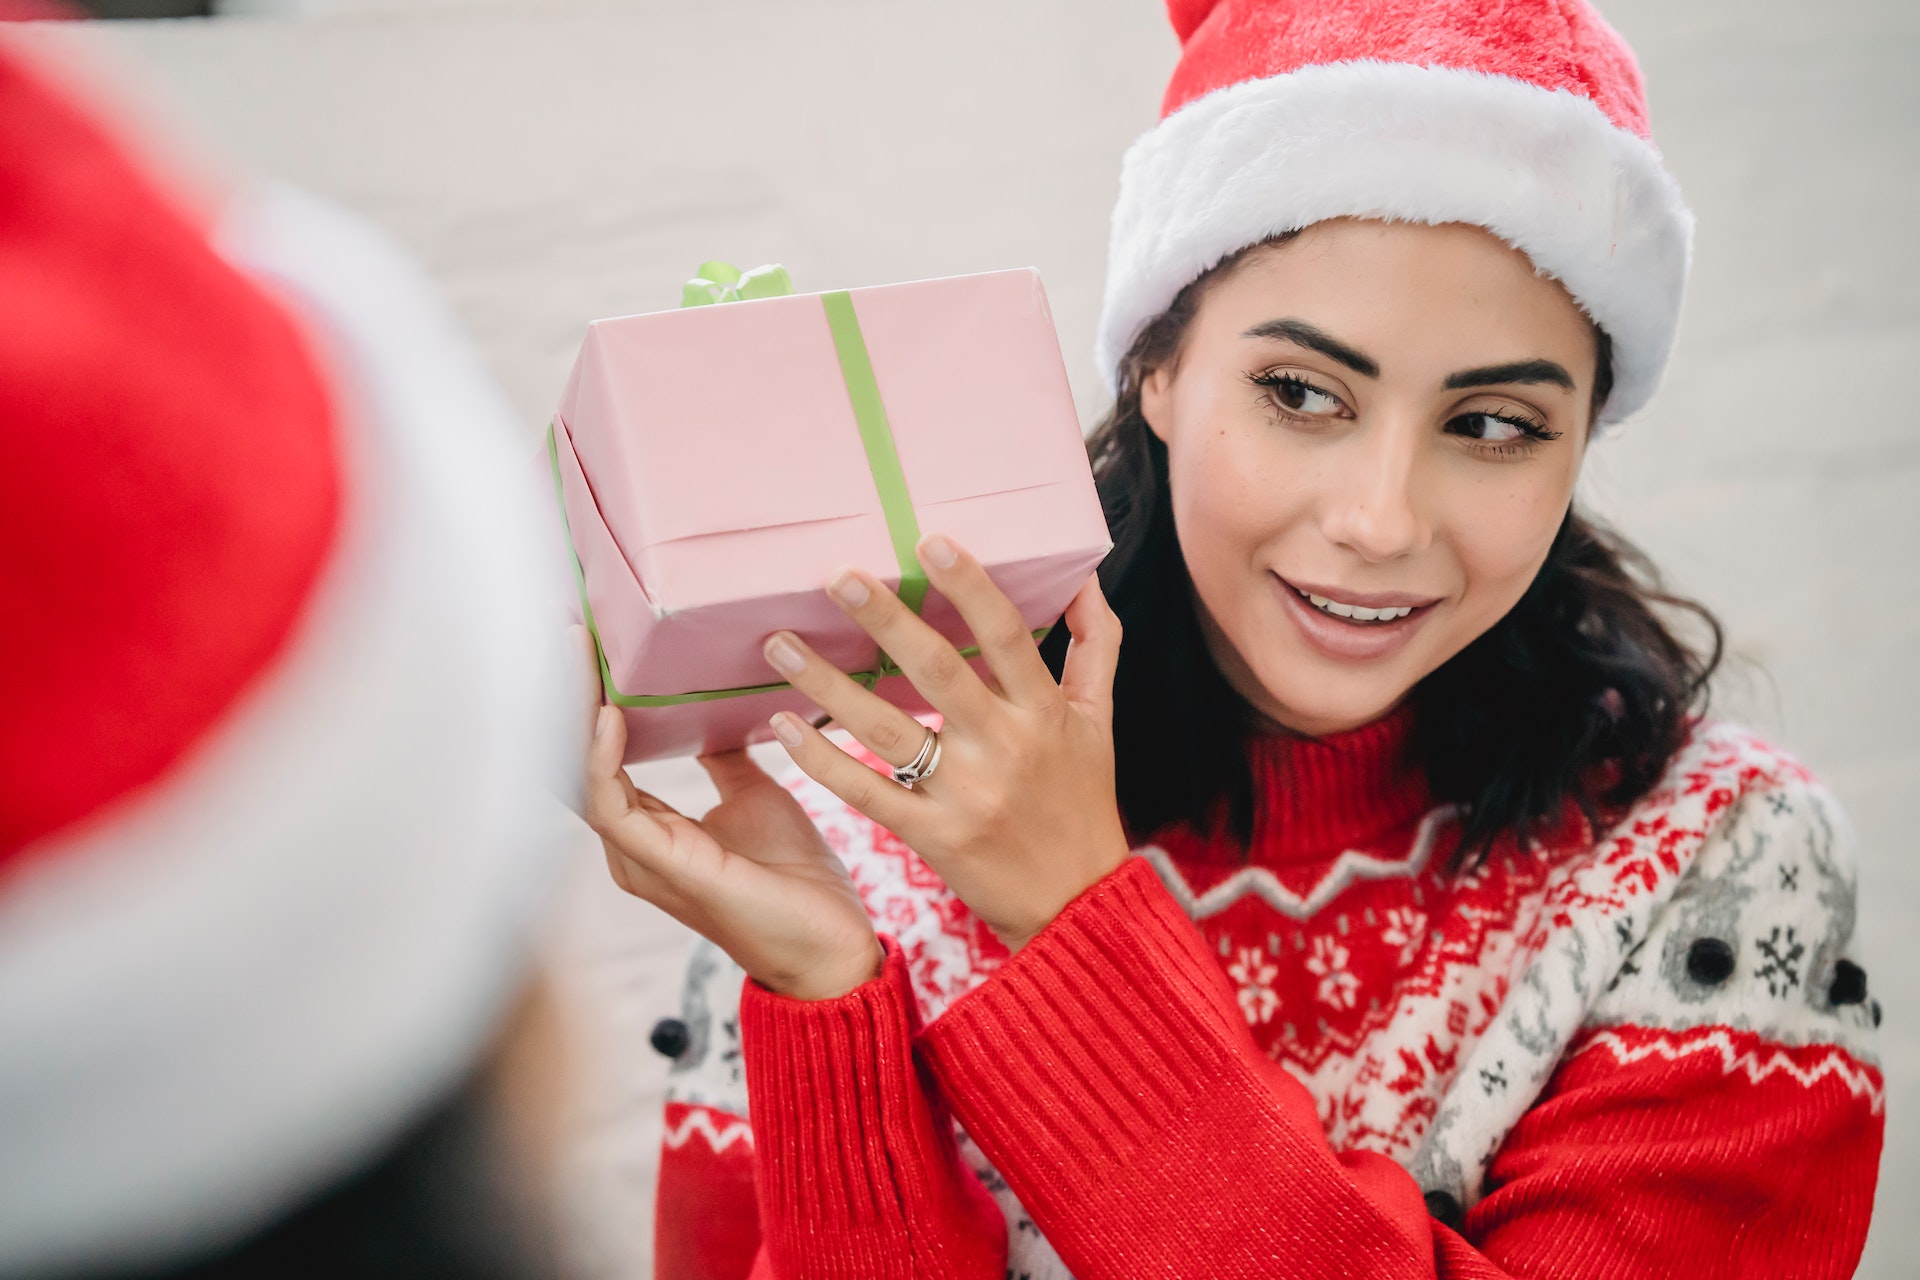 The image features a person wearing a red Santa hat and a red sweater with white snowflake patterns, suggesting a holiday theme, likely Christmas. The person is smiling and holding a pink gift wrapped with a green ribbon, seemingly looking at another person who is only partially visible and also appears to be wearing a red Santa hat. The partial view of the second person suggests that the photo might be taken from their perspective. The background is neutral and blurred, keeping the focus on the two people and the gift exchange moment.